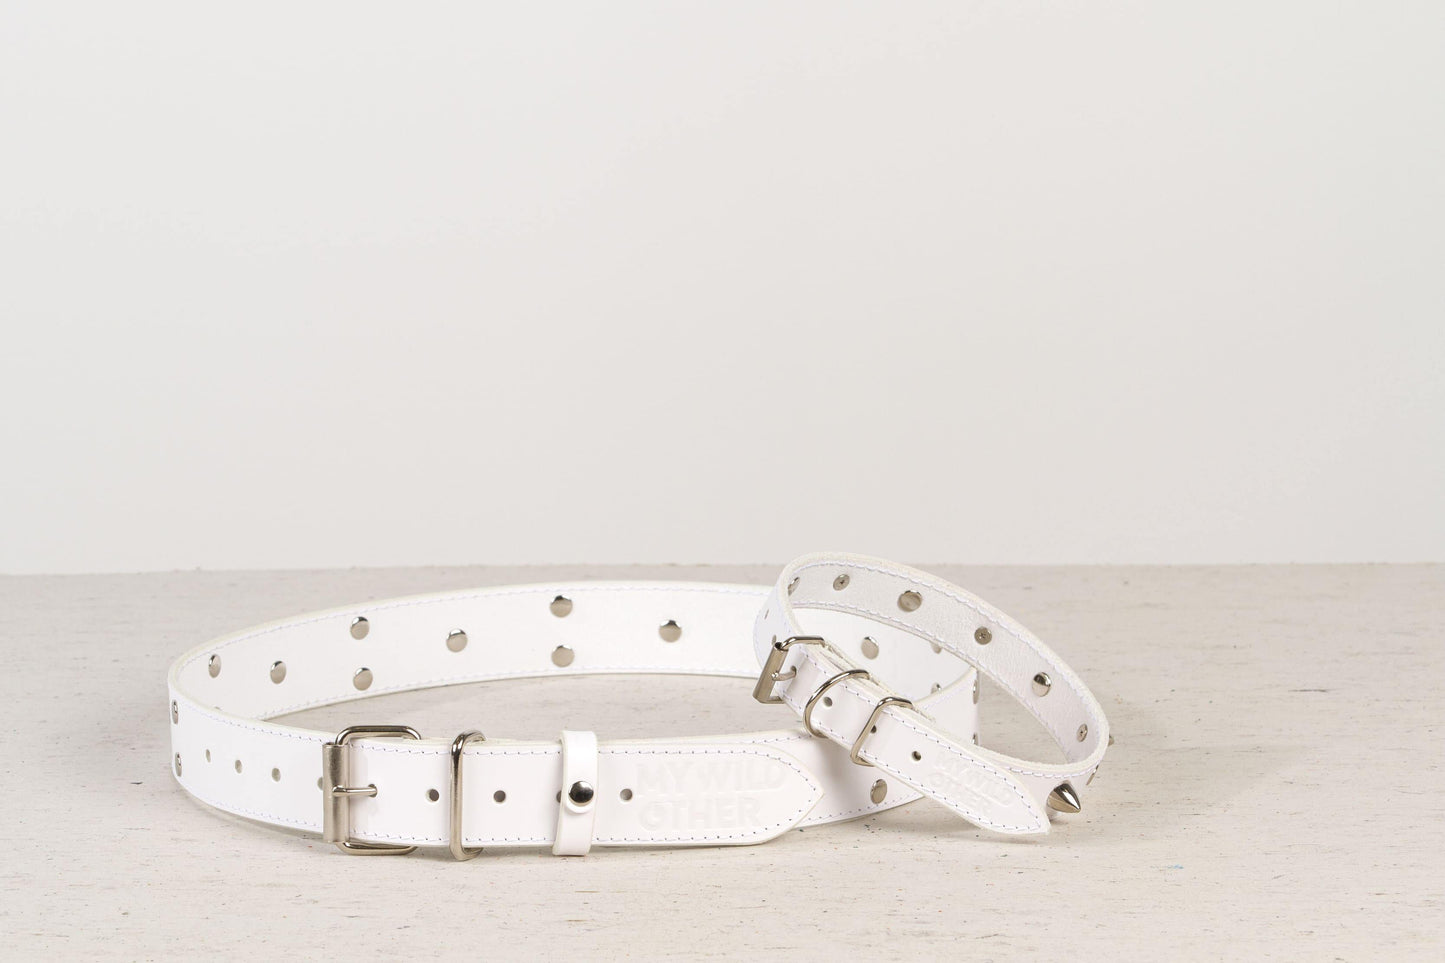 Handmade white leather STUDDED dog collar - European handmade dog accessories by My Wild Other